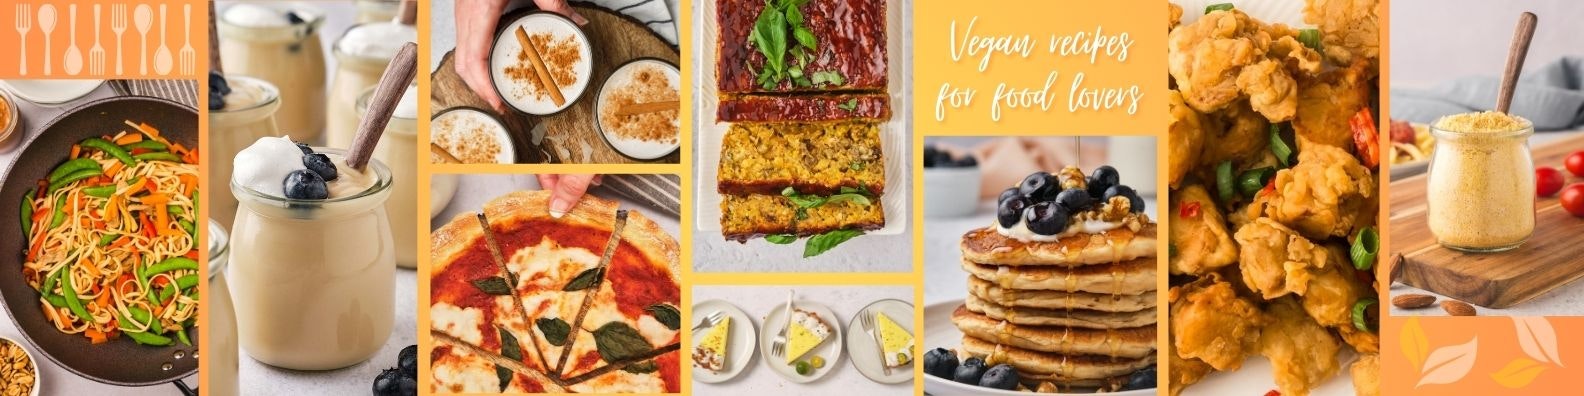 A collage of vegan dishes with text that says, vegan recipes for food lovers.